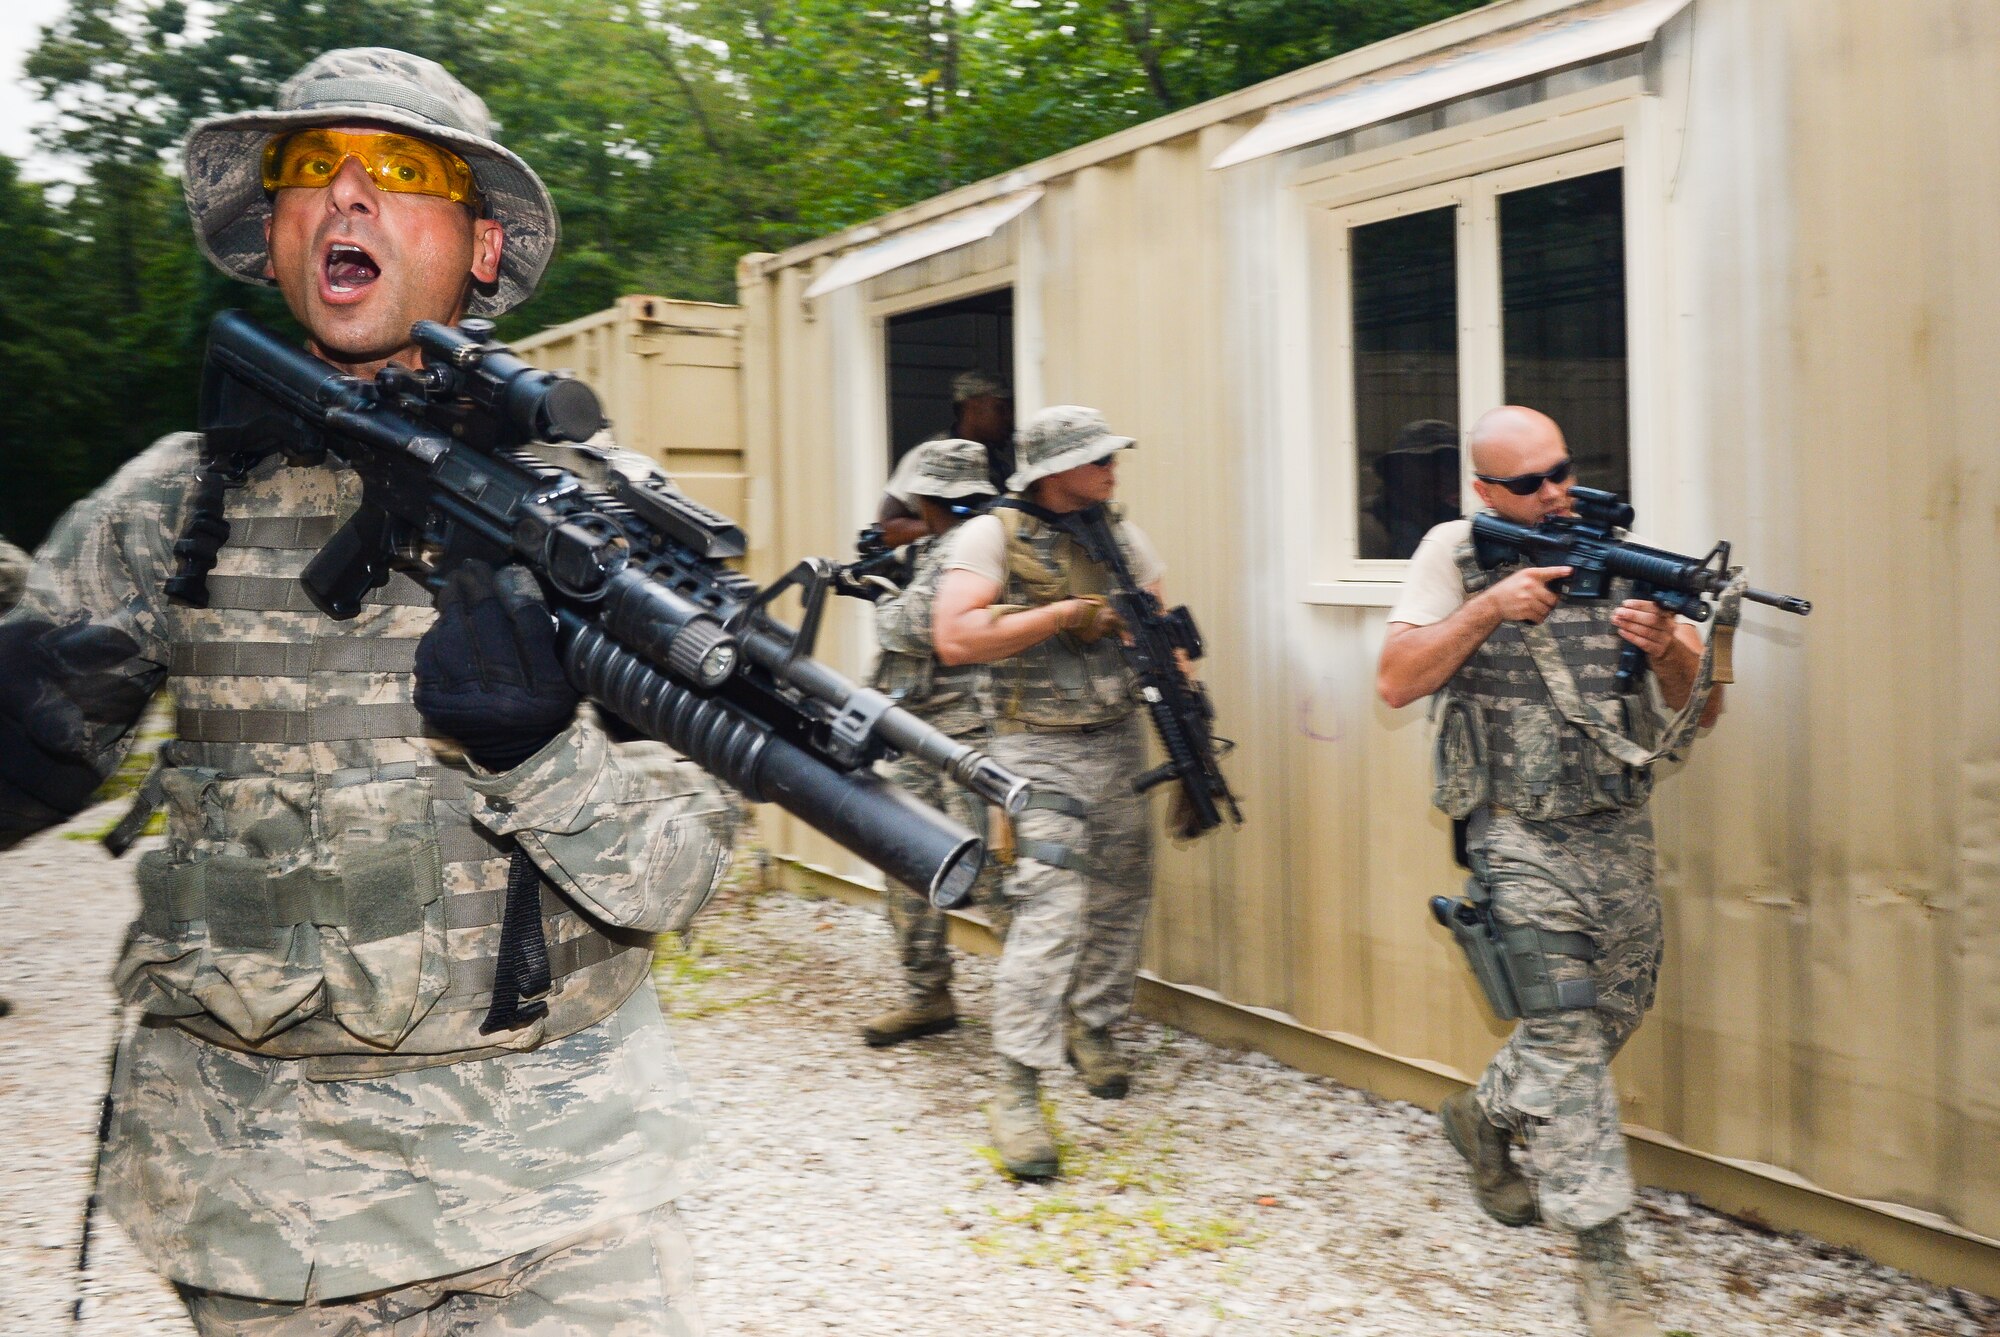 U.S. Airmen from the 116th Security Forces Squadron (SFS), Georgia Air National Guard, take part in counterinsurgency operations, or COIN, training at the Catoosa Training Site, Tunnel Hill, Ga., June 29, 2014. The 116th SFS deployed to the Catoosa Training Site for annual training where they received extensive classroom and hands-on training to hone their skills on various firearms such as the M4 carbine, M203 grenade launcher and M240 and M249 machine guns as well as training in various security operations performed by Air Force security forces personnel. During COIN training, the Security Forces Airmen used a simulated local village to practice building breaching and clearing operations as well as working with the local populace while encountering simulated threats. (U.S. Air National Guard photo by Master Sgt. Roger Parsons/Released)